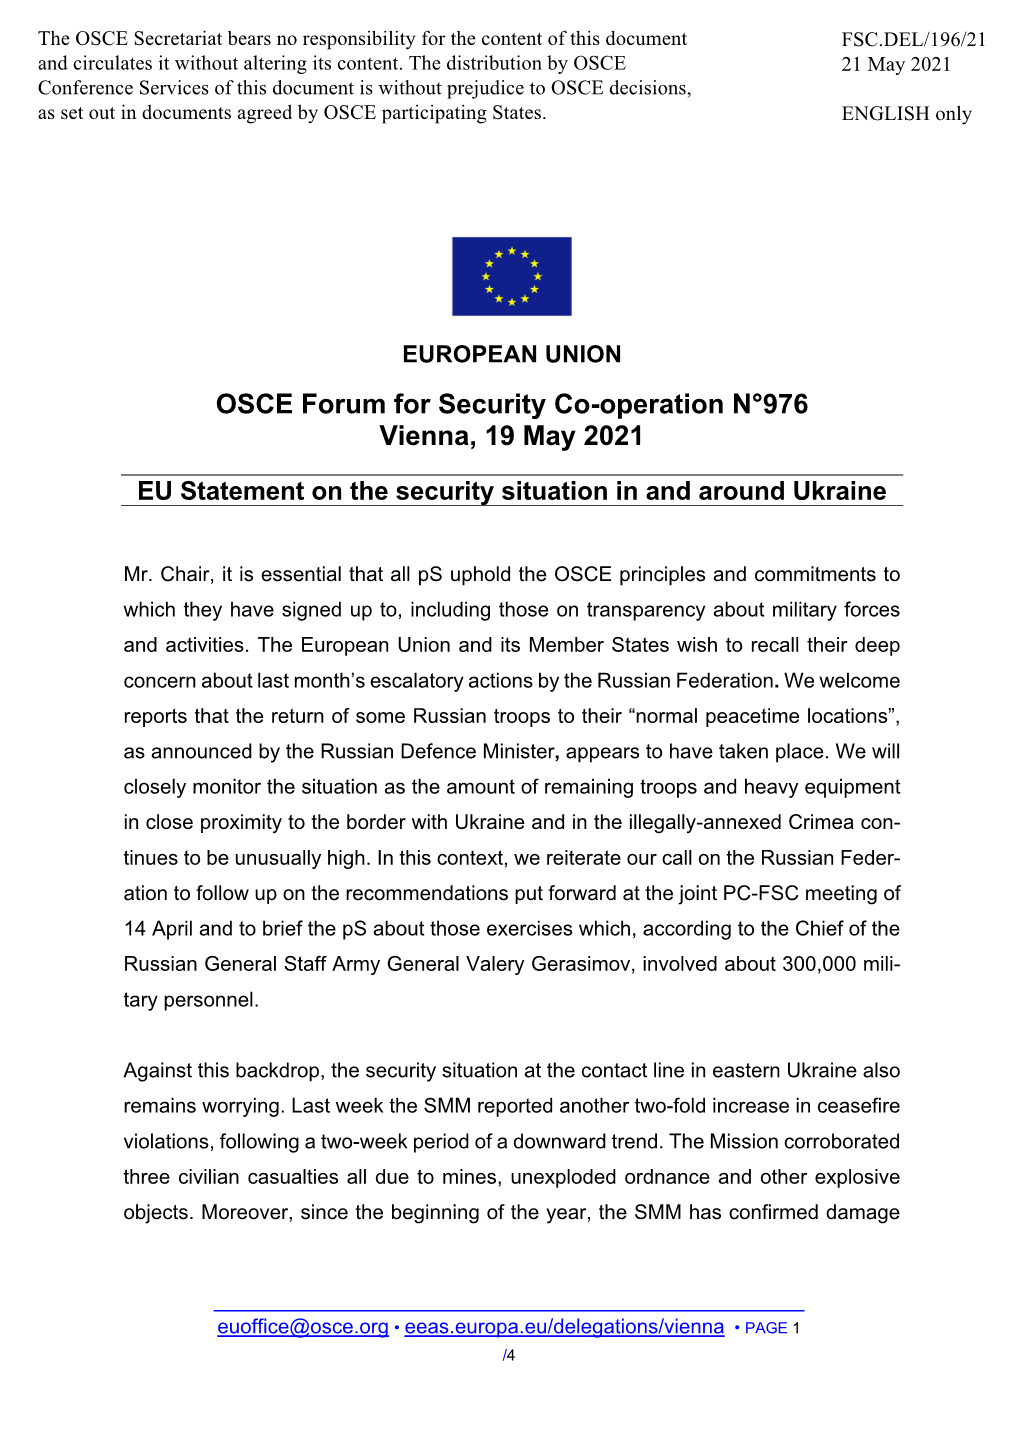 OSCE Forum for Security Co-Operation N°976 Vienna, 19 May 2021